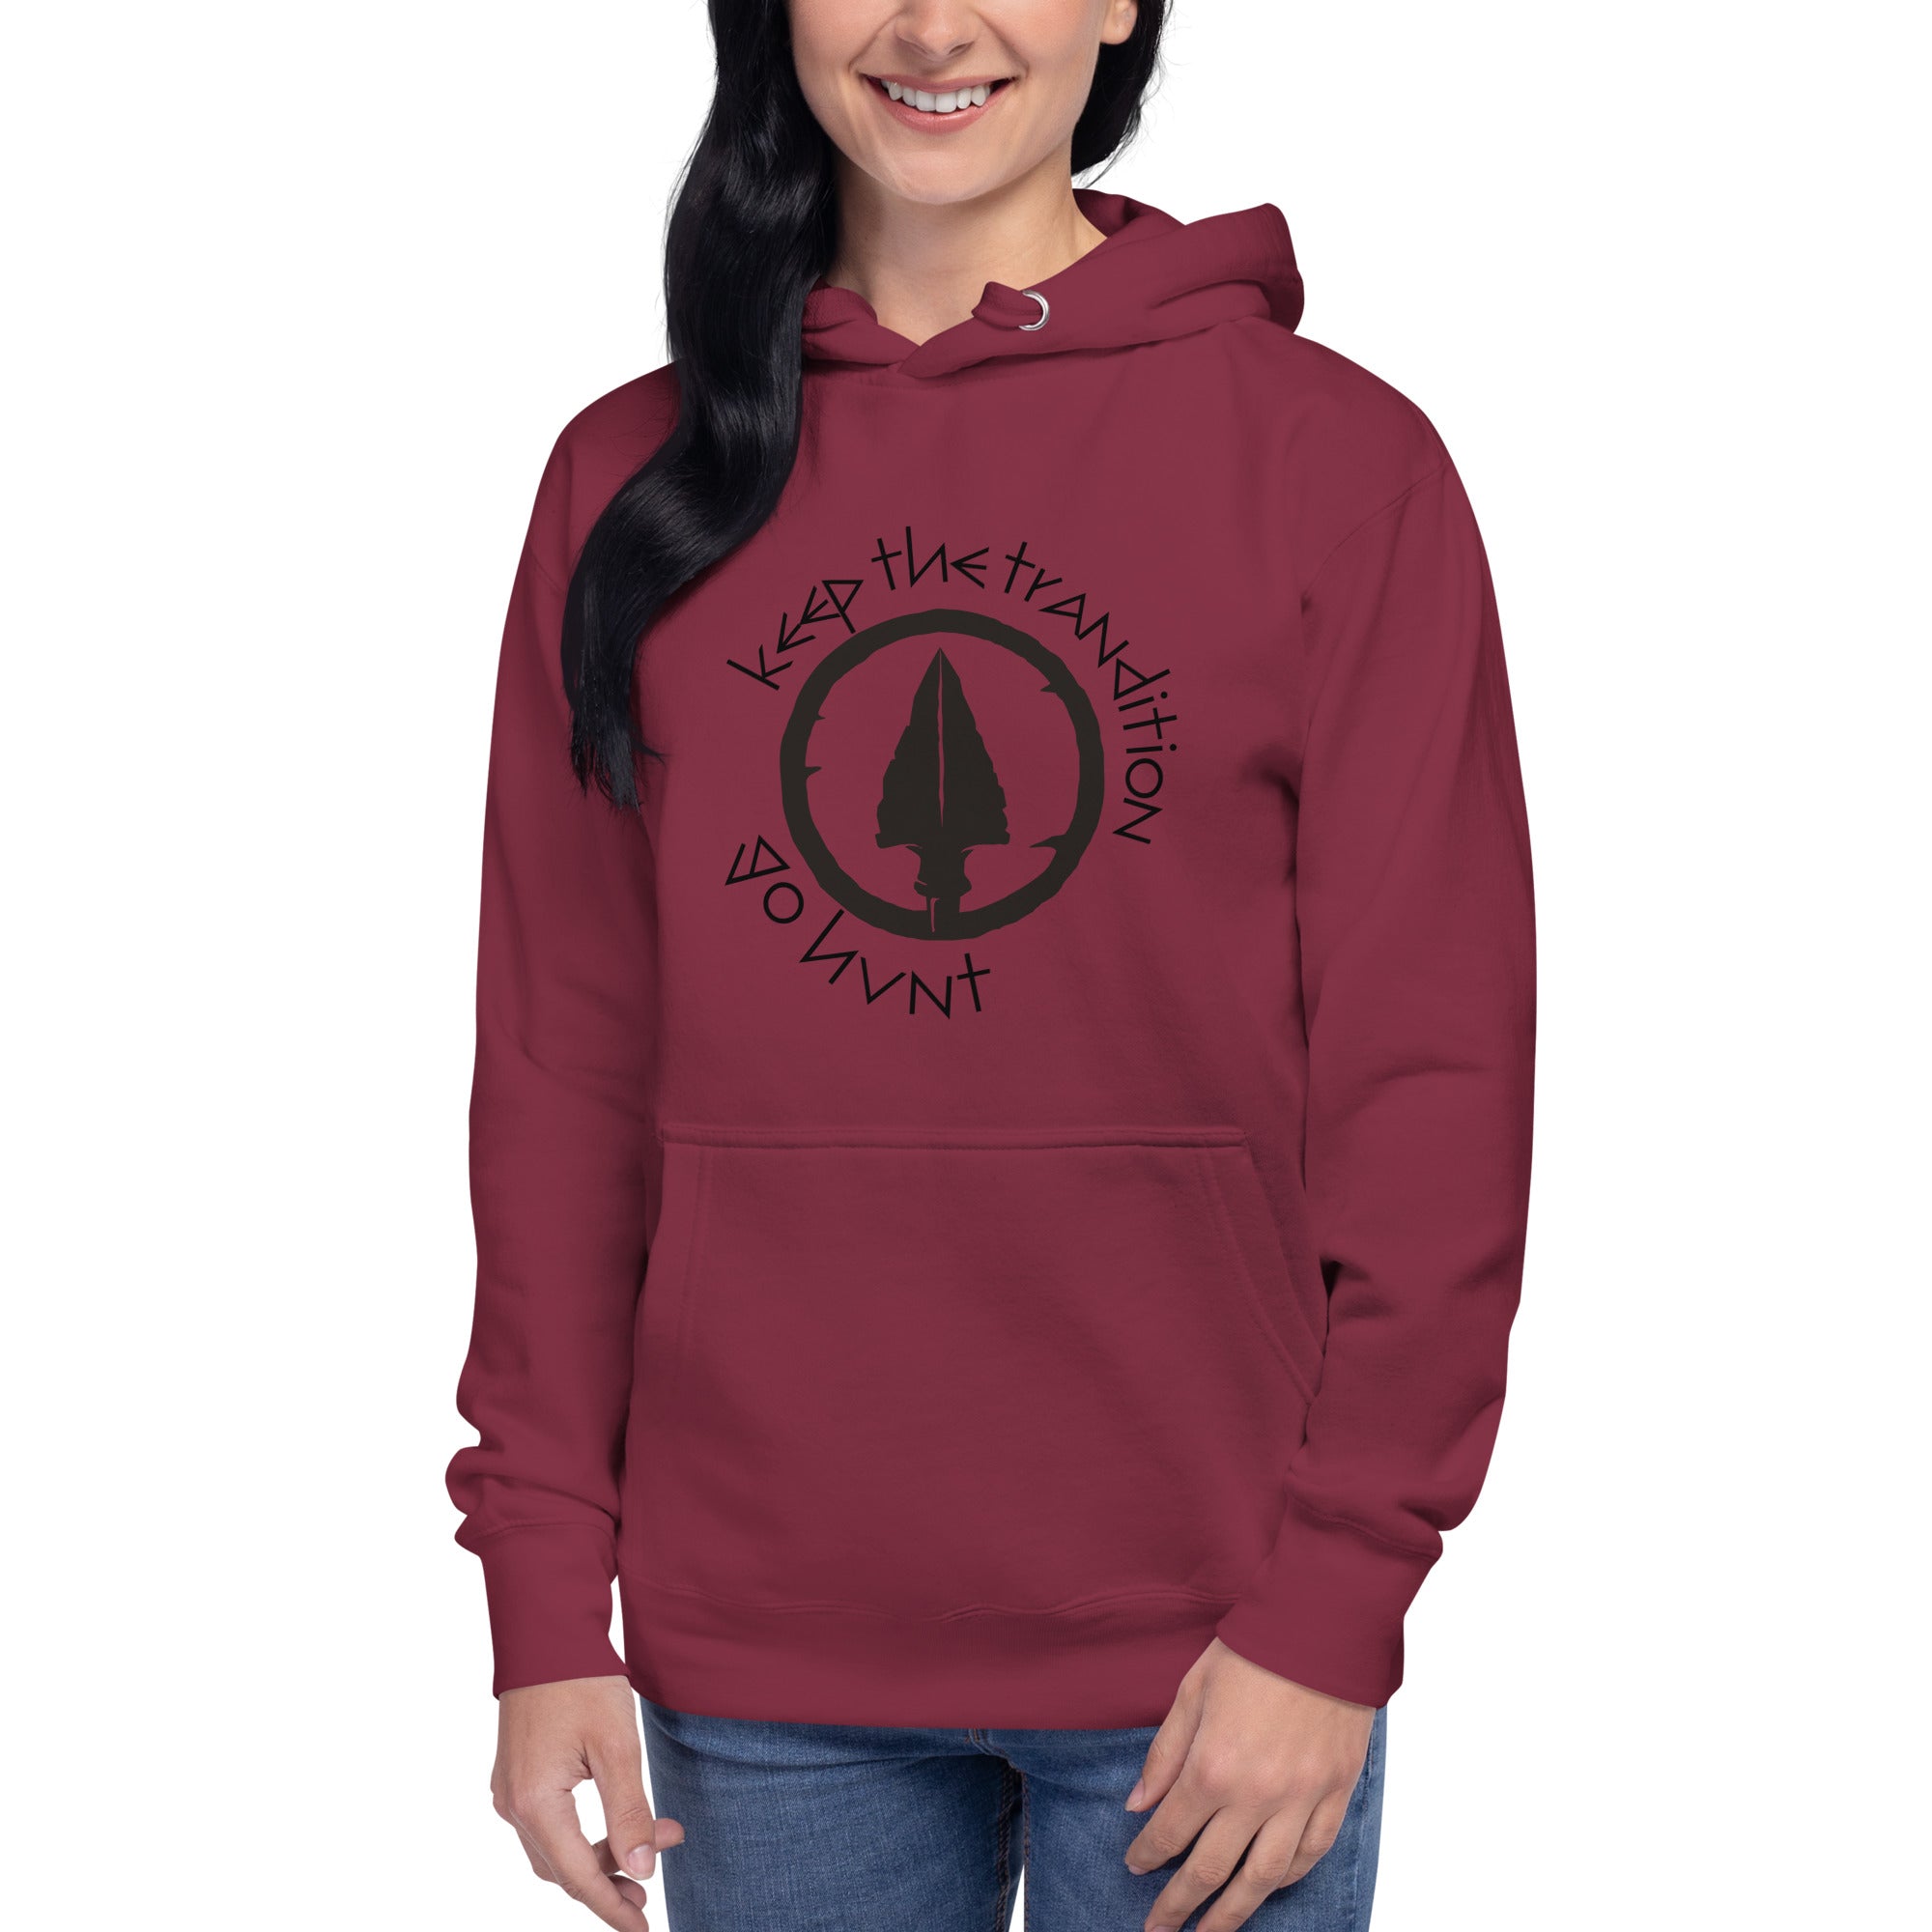 Keep The Tradition Women's Heavy Hoodie - Go Hunt